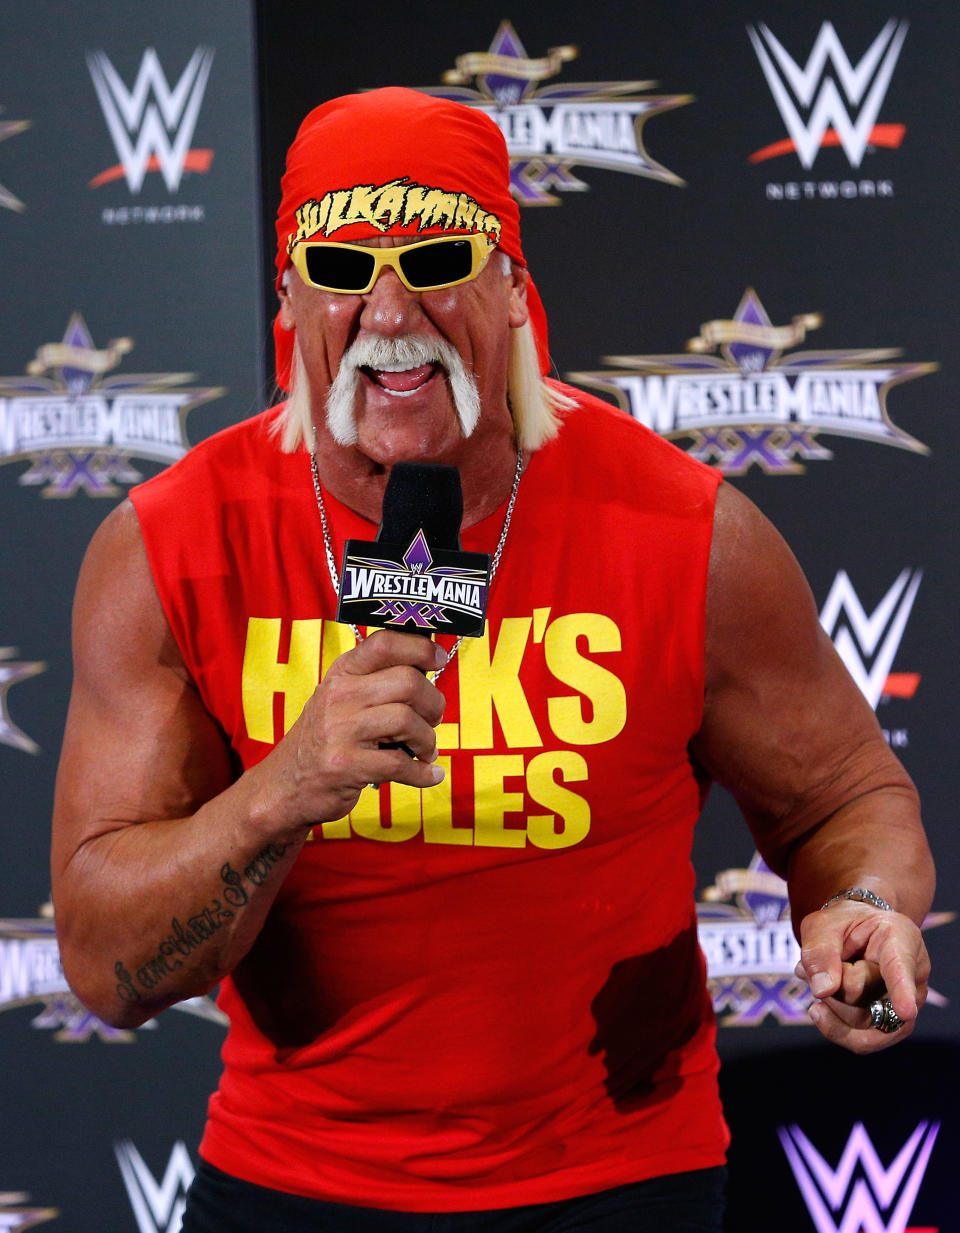 Hulk Hogan speaks during a news conference before Wrestlemania XXX at the Mercedes-Benz Super Dome in New Orleans on Sunday, April 6, 2014. (Jonathan Bachman/AP Images for WWE)